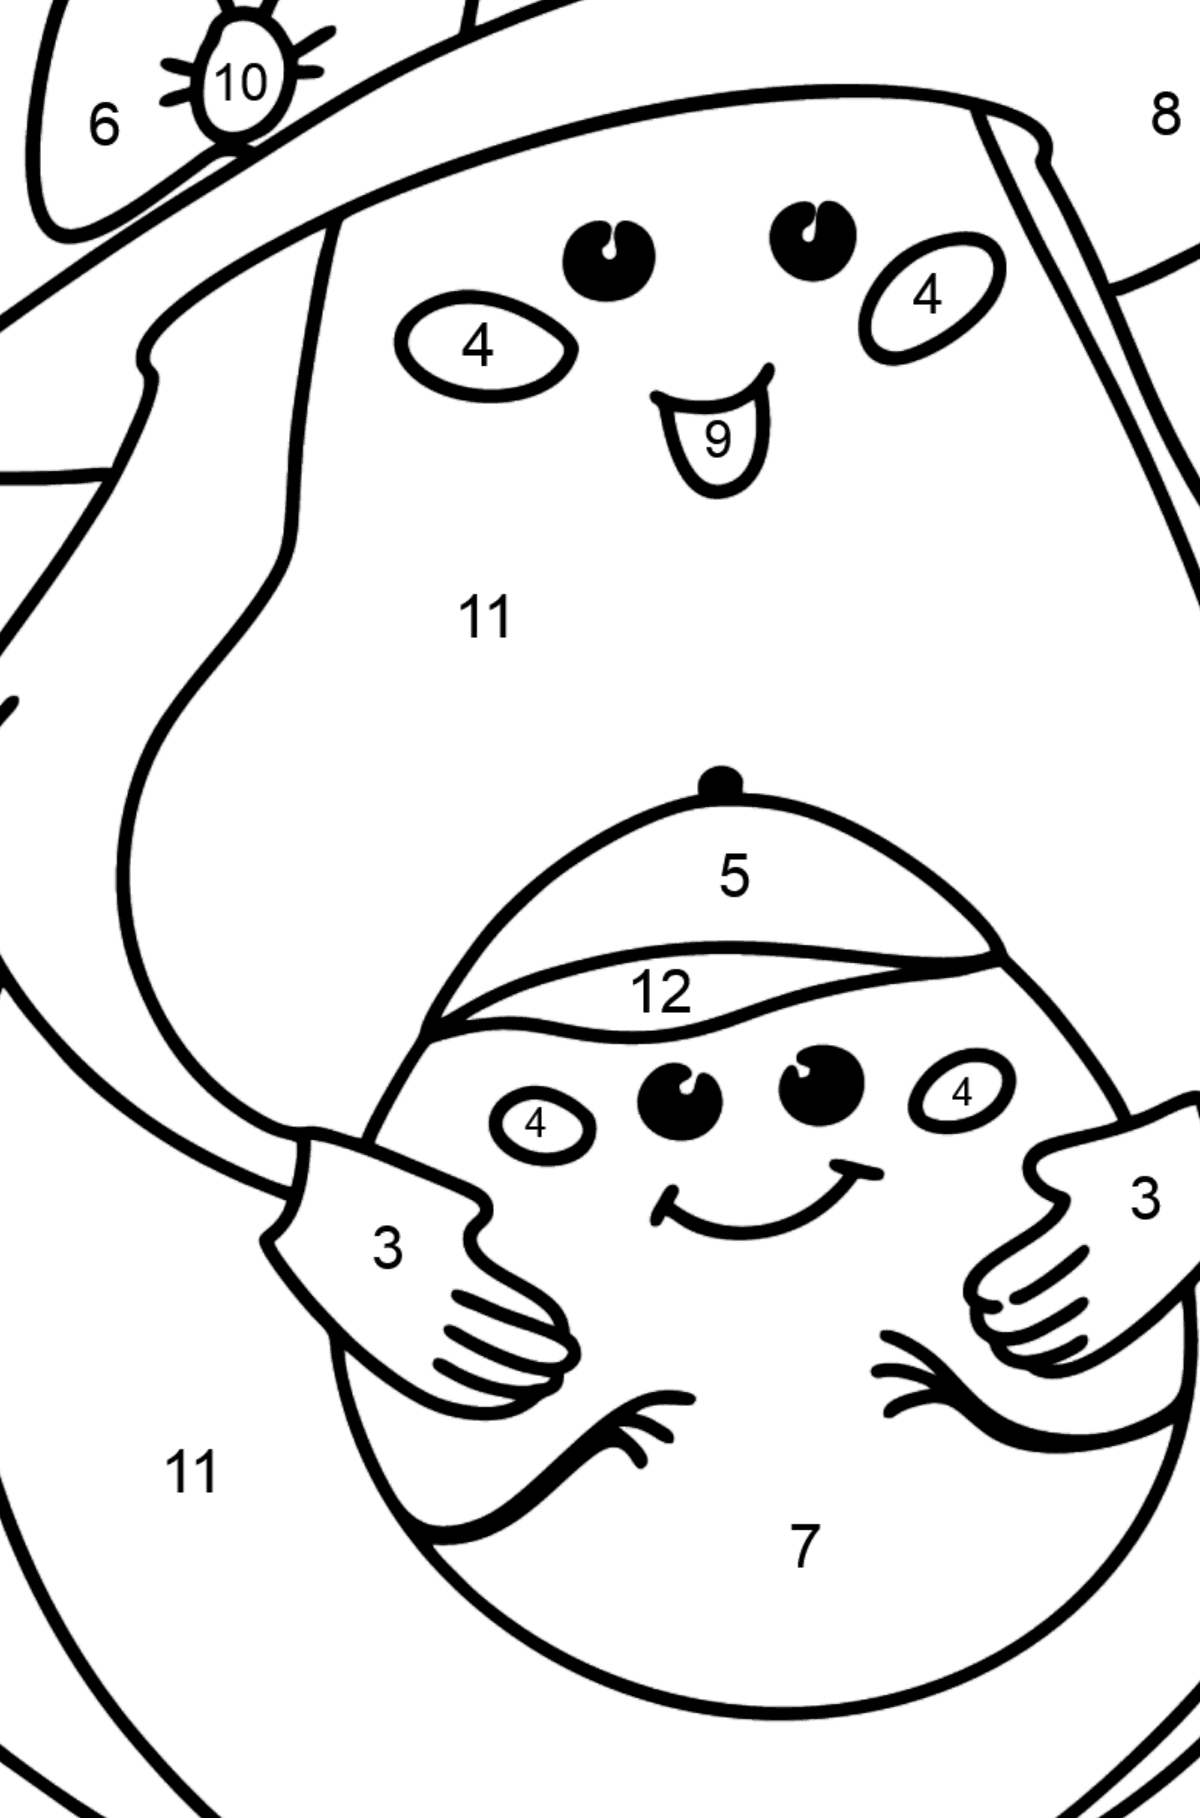 Avocado Mom with Baby coloring page - Coloring by Numbers for Kids